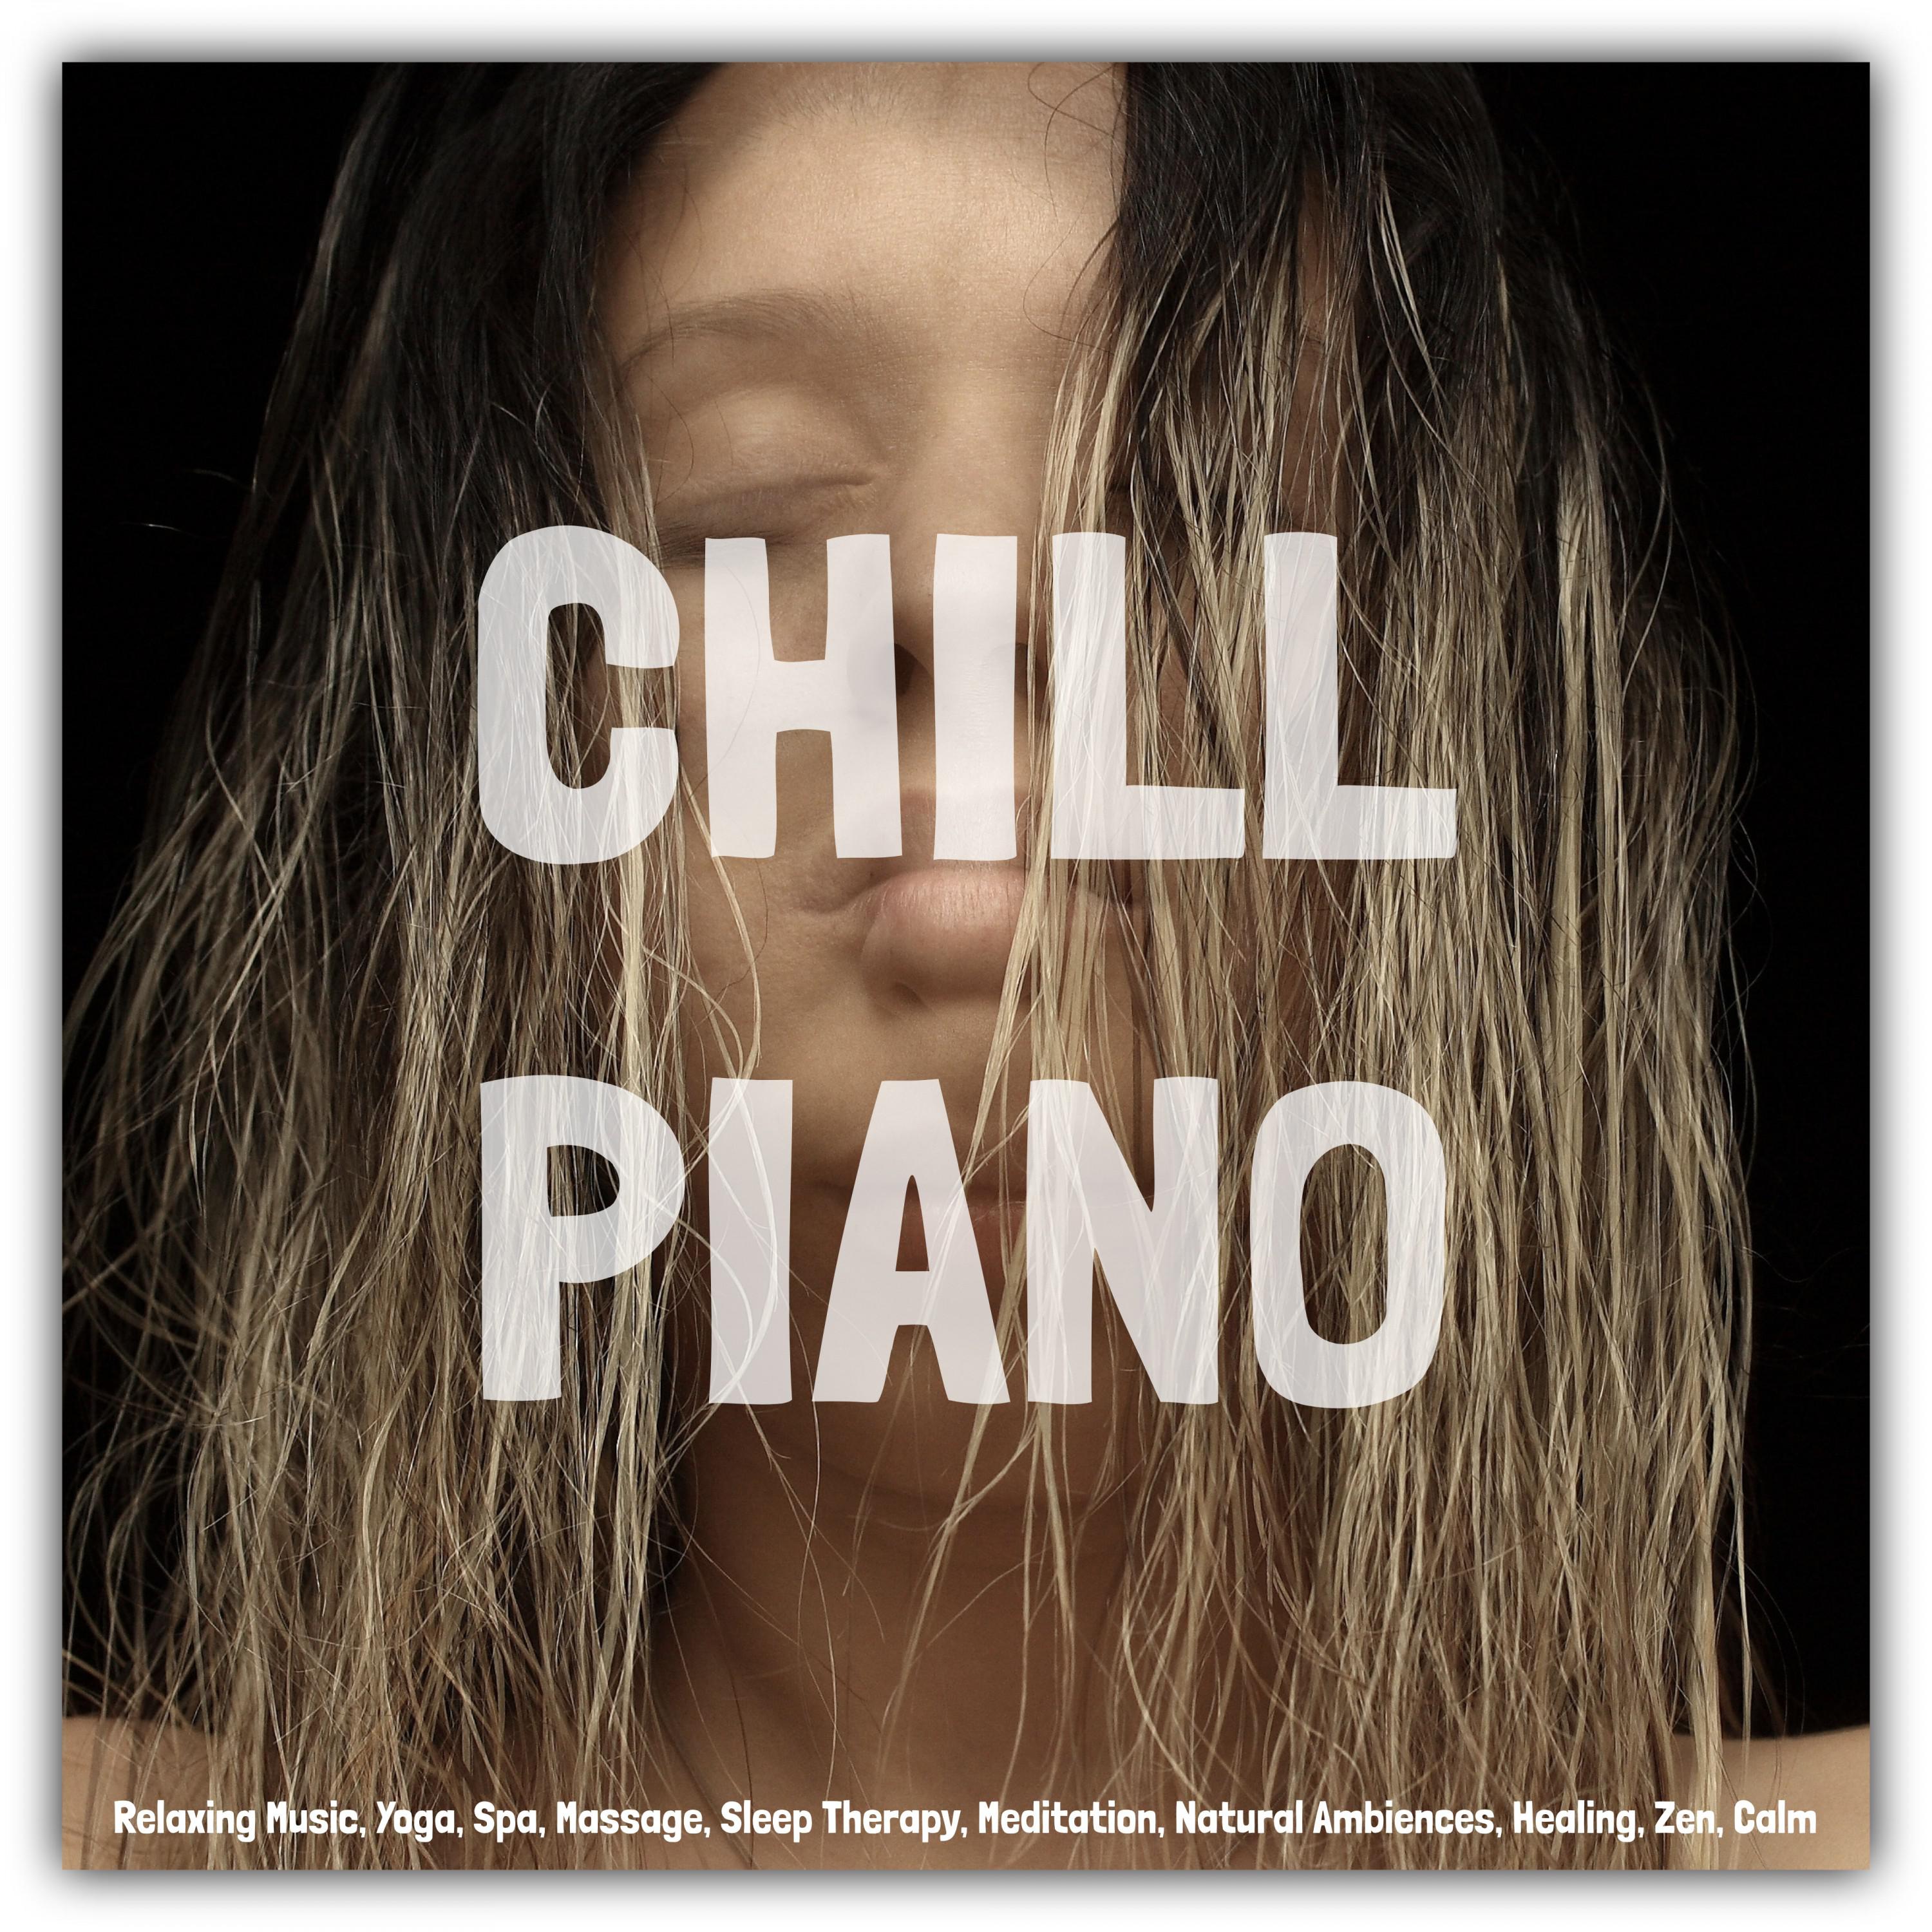 Chill Piano: Relaxing Music, Yoga, Spa, Massage, Sleep Therapy, Meditation, Natural Ambiences, Healing, Zen, Calm